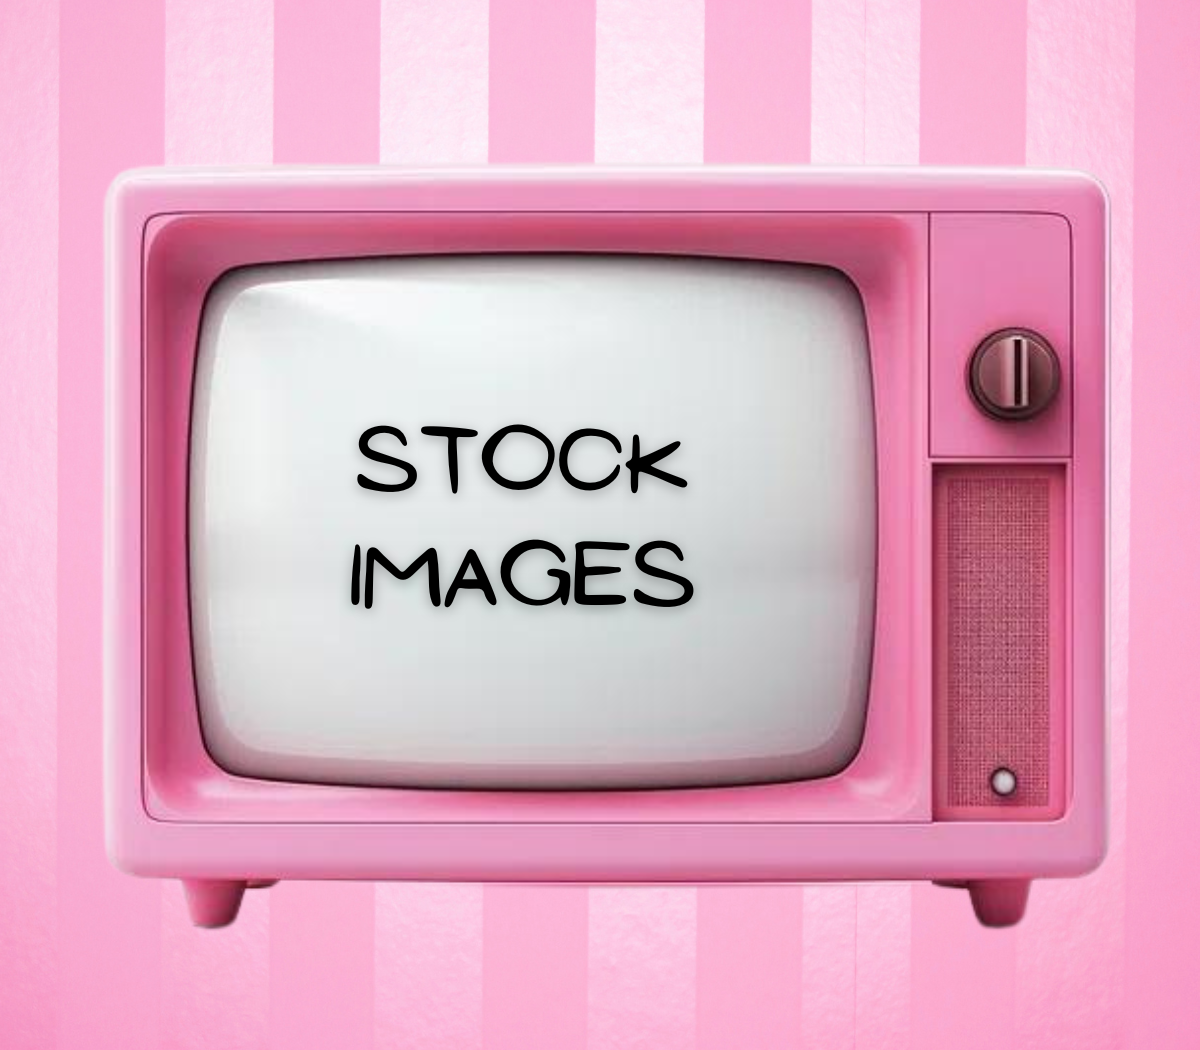 STOCK IMAGES